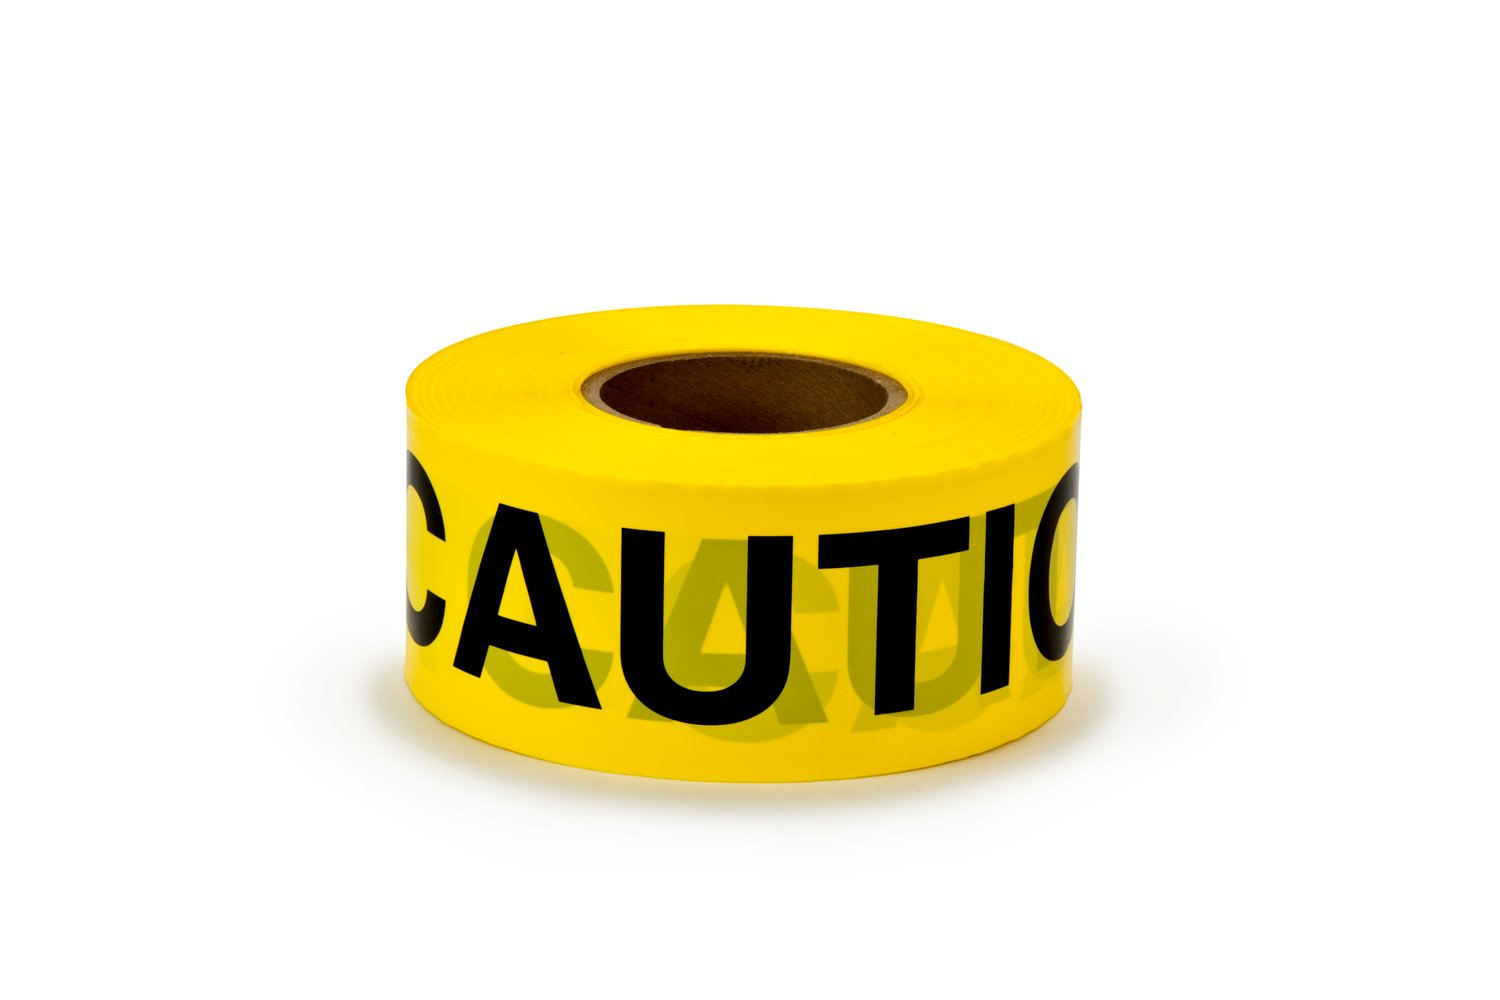 7000132914 - Scotch Barricade Tape 301, CAUTION, 3 in x 300 ft, Yellow, 16
rolls/Case